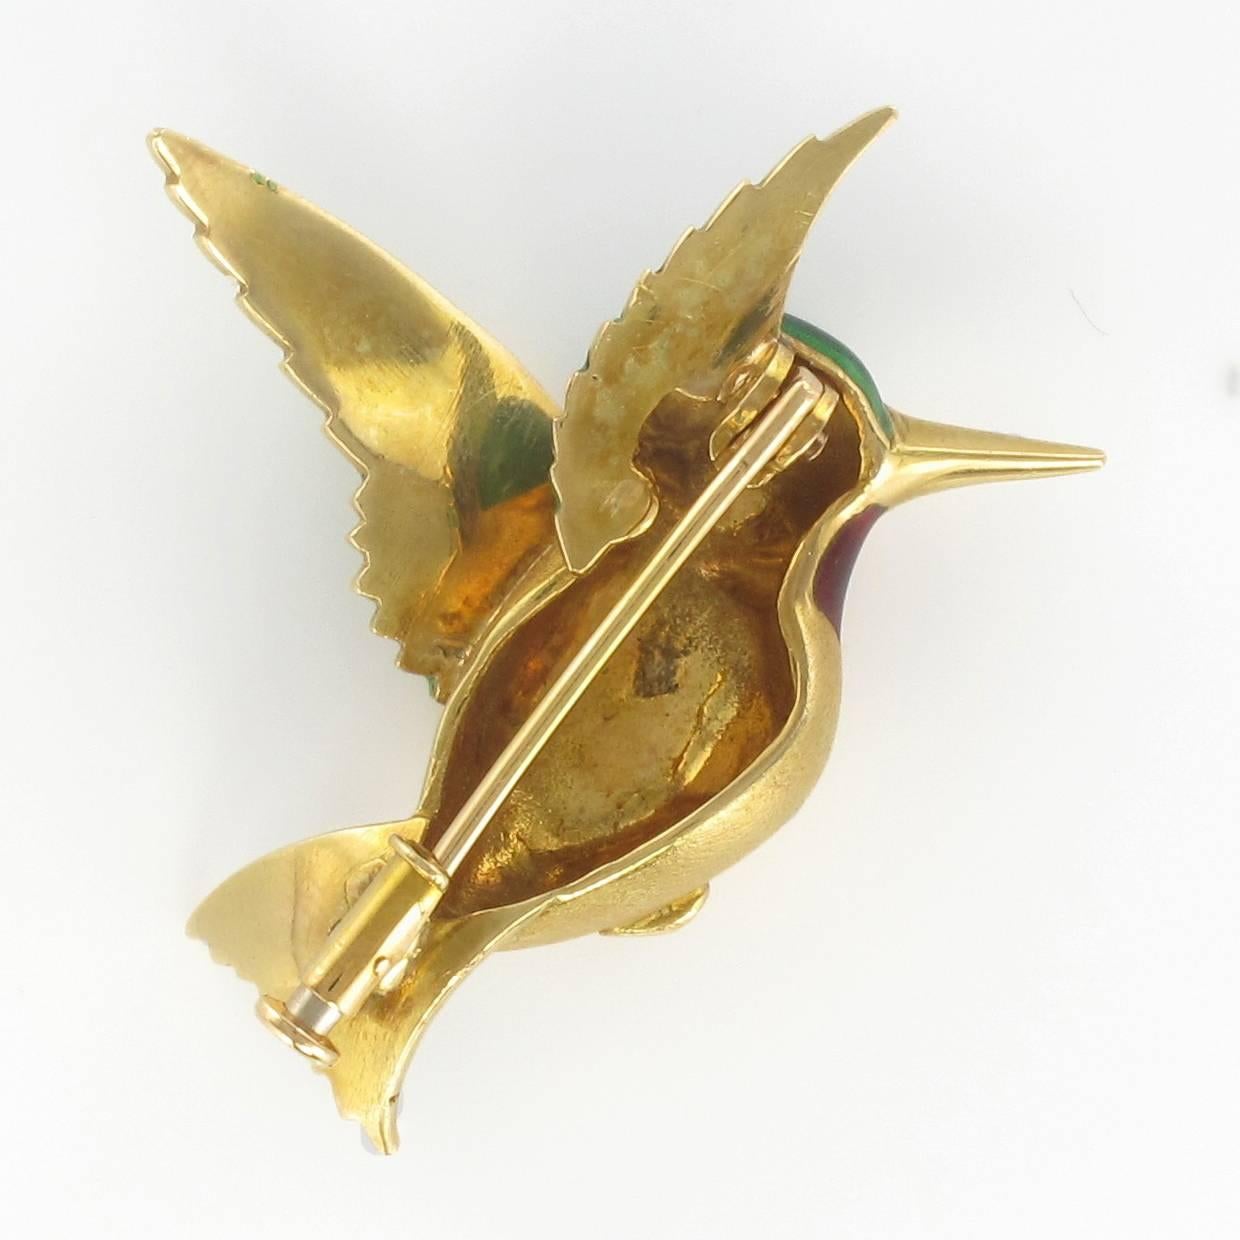 Brooch in 18 carat yellow gold, eagle head hallmark. 

This splendid brooch displays a humming bird in flight. The body is gold, the wing and tail feathers are in green enamel, the neck and the eye are red enamel. The clasp of this brooch is a pin